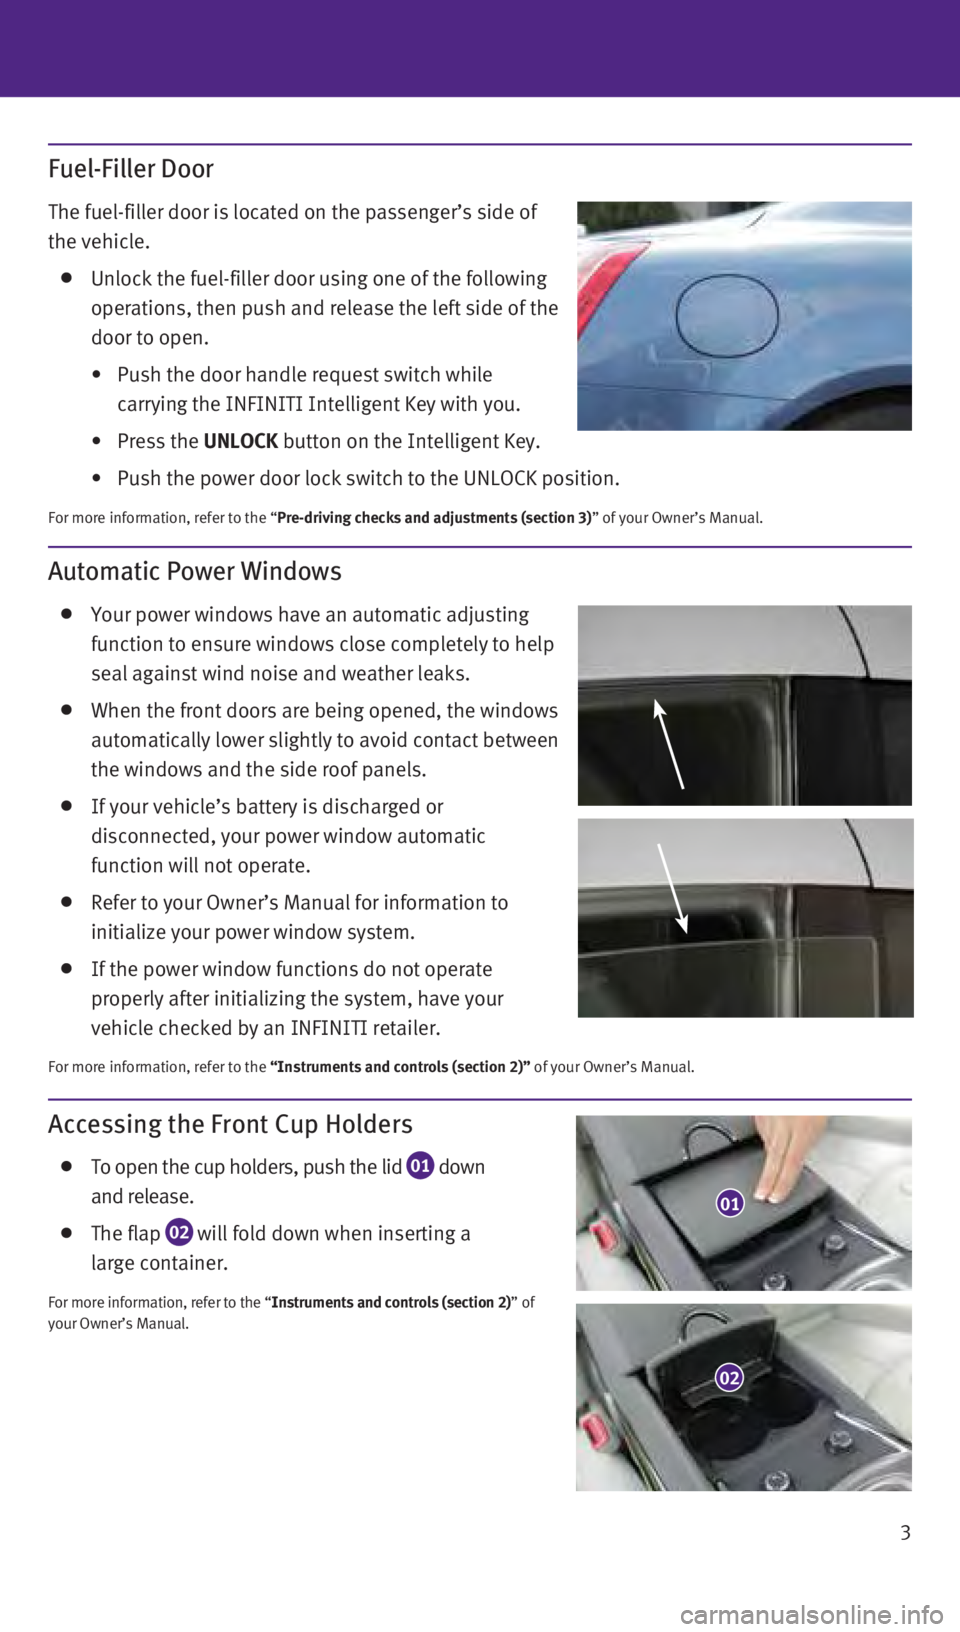 INFINITI Q60 COUPE 2014  Quick Reference Guide 3
Accessing the Front Cup Holders
   To open the cup holders, push the lid 01  down 
 
and release.
   The flap  02  will fold down when inserting a 
 
large container.
For more information, refer to 